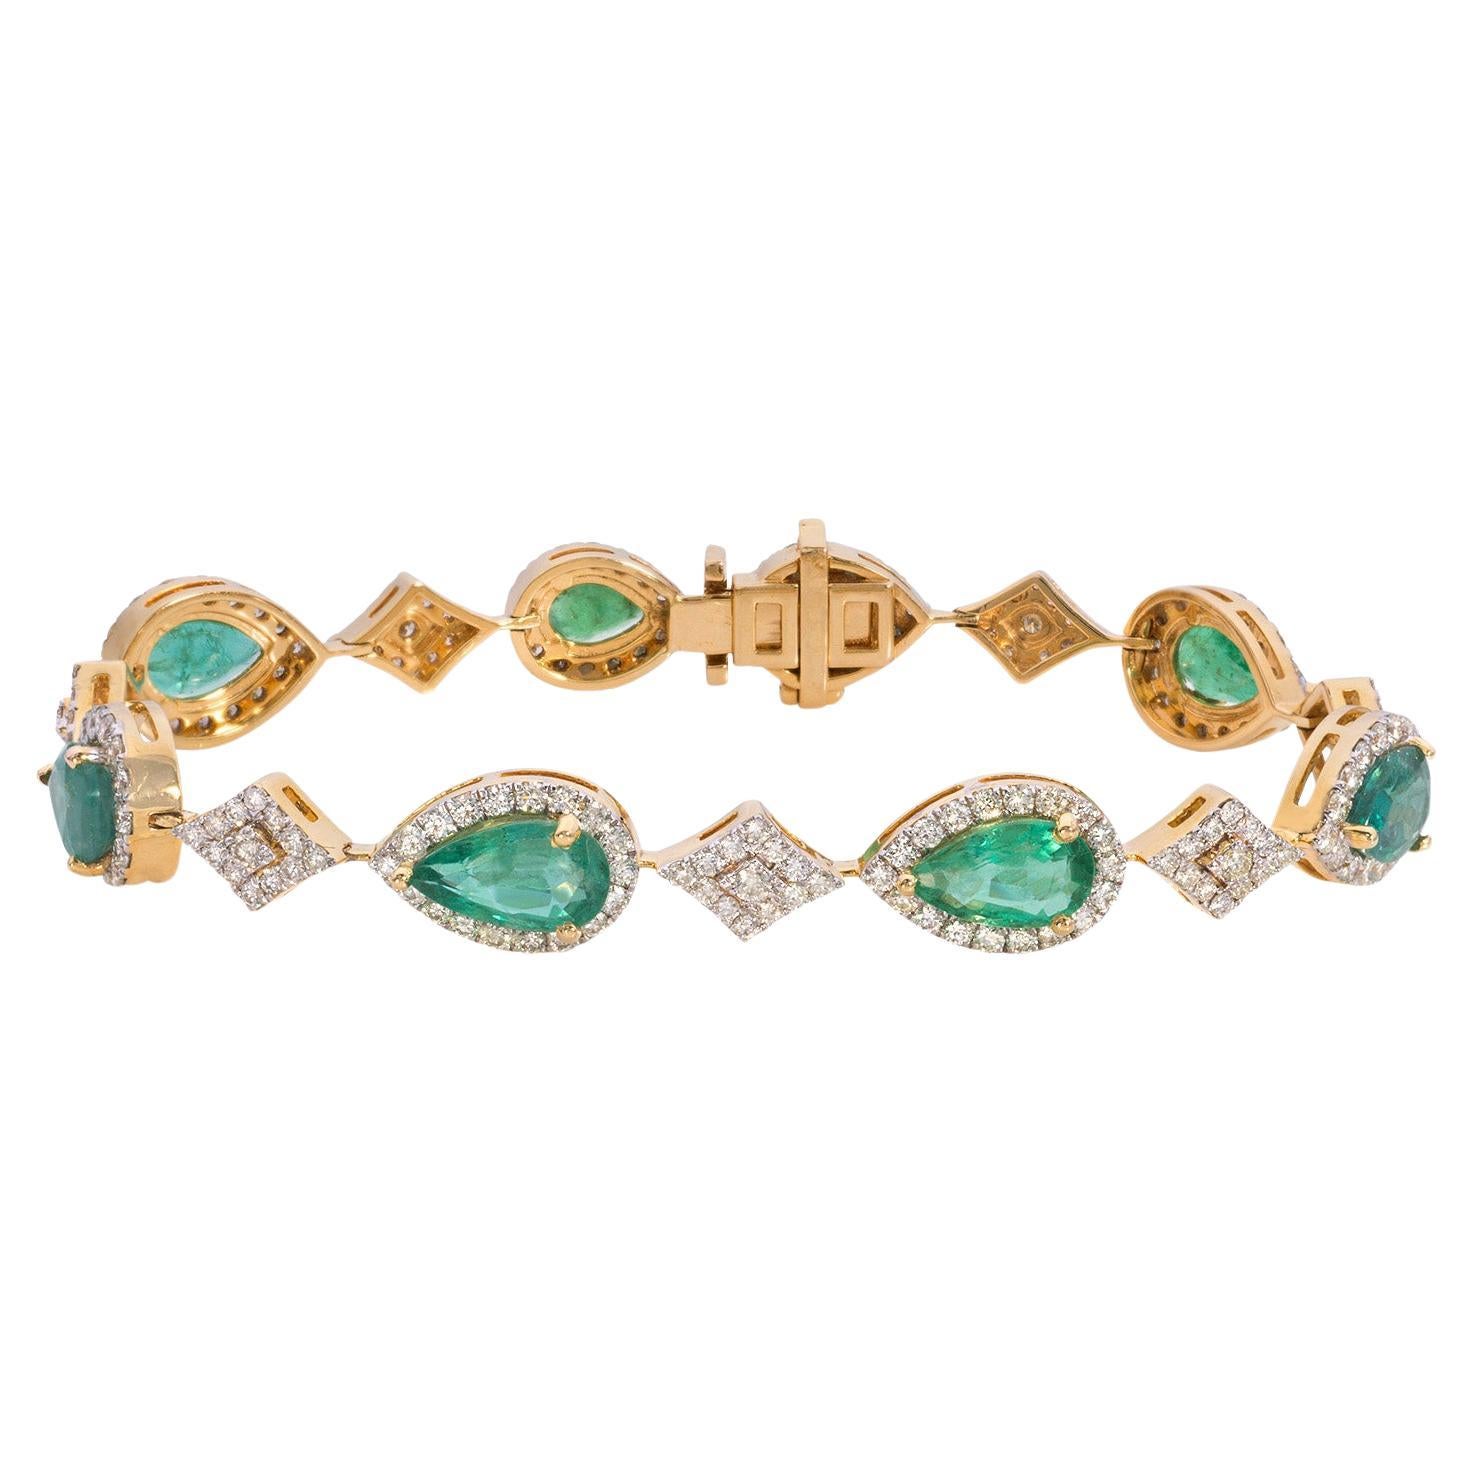 Indulge in the captivating allure of this stunning emerald and diamond bracelet, a true embodiment of elegance and luxury. Crafted in 18K yellow gold, this exquisite piece features a mesmerizing array of drop-shaped natural emeralds, each embraced